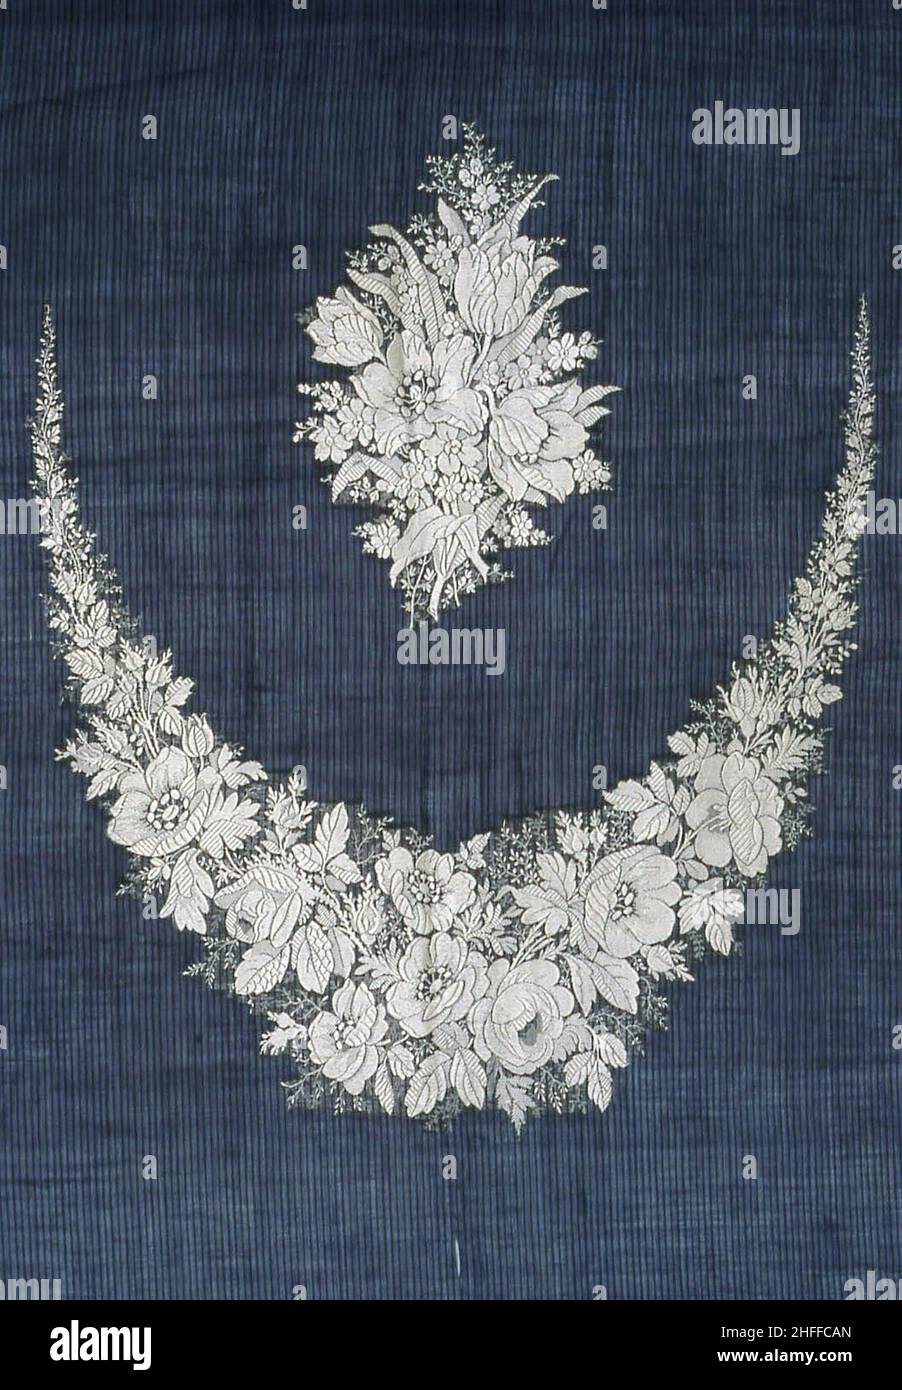 Panel to be Used as Dress or Gown Inserts, France, Mid-19th century. Stock Photo